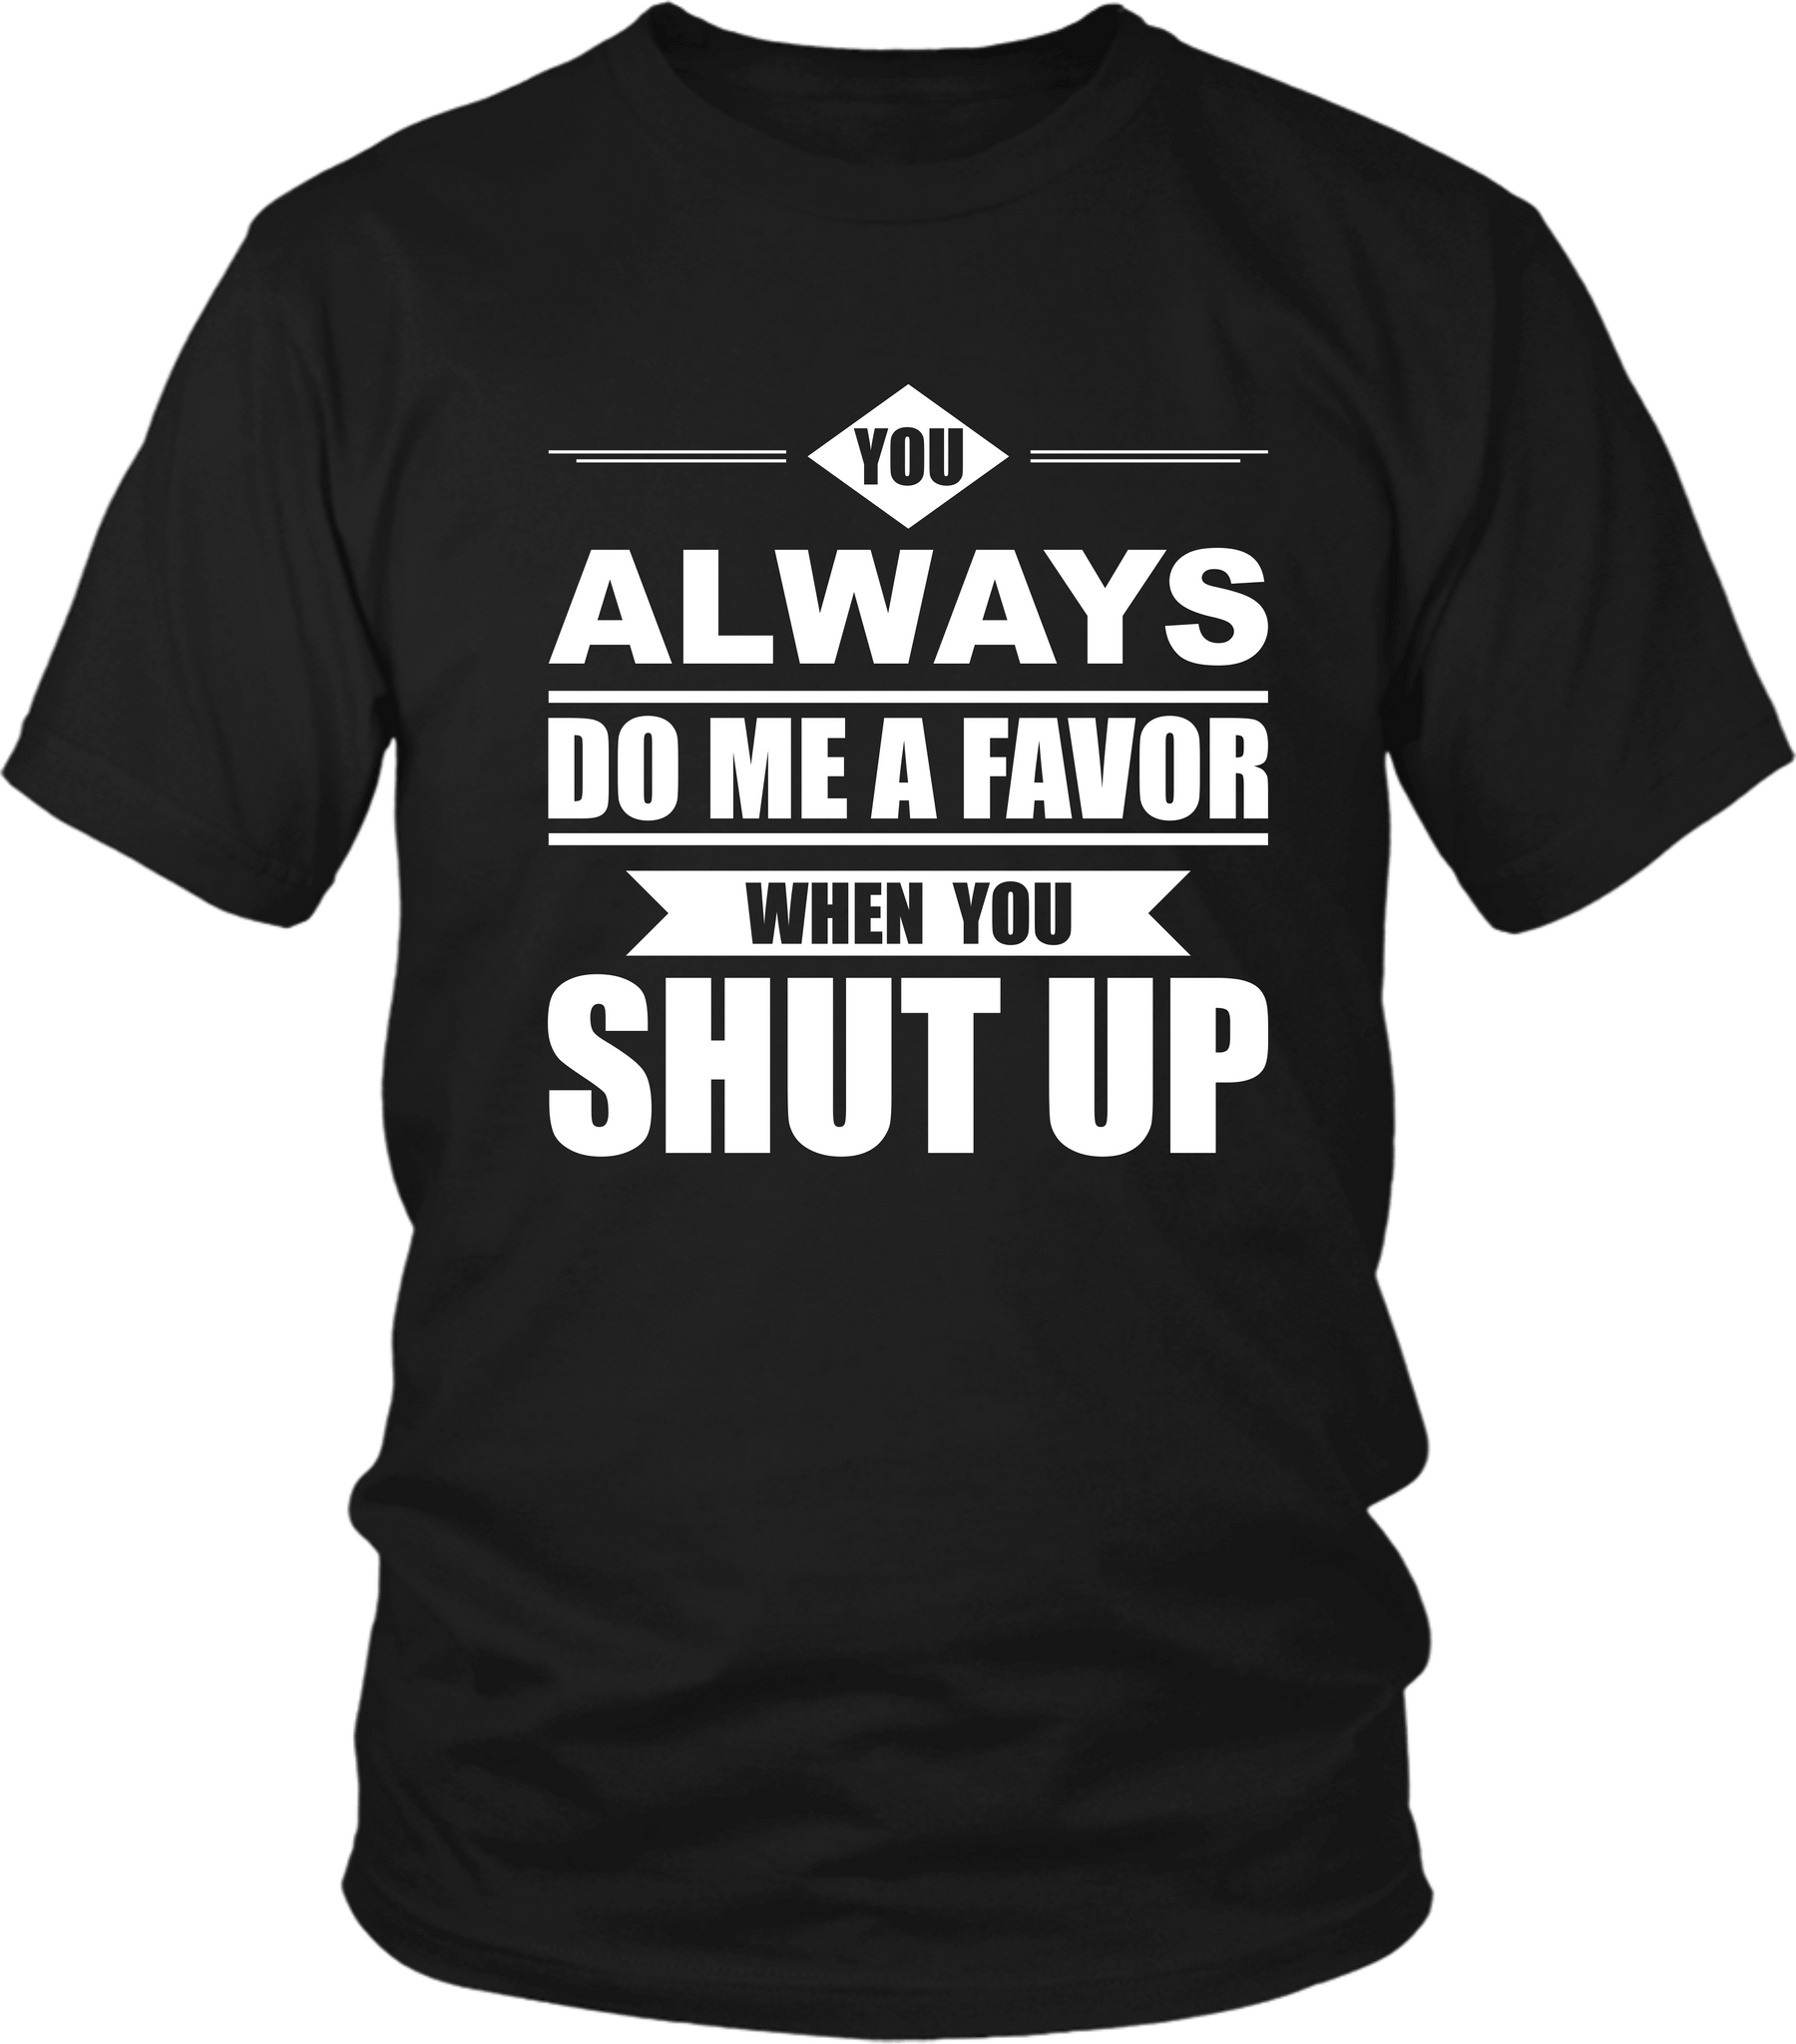 Trendy Tee***You Always Do Me A Favor When You Shut Up** Funny T-shirt  Design.... - xpertapparel